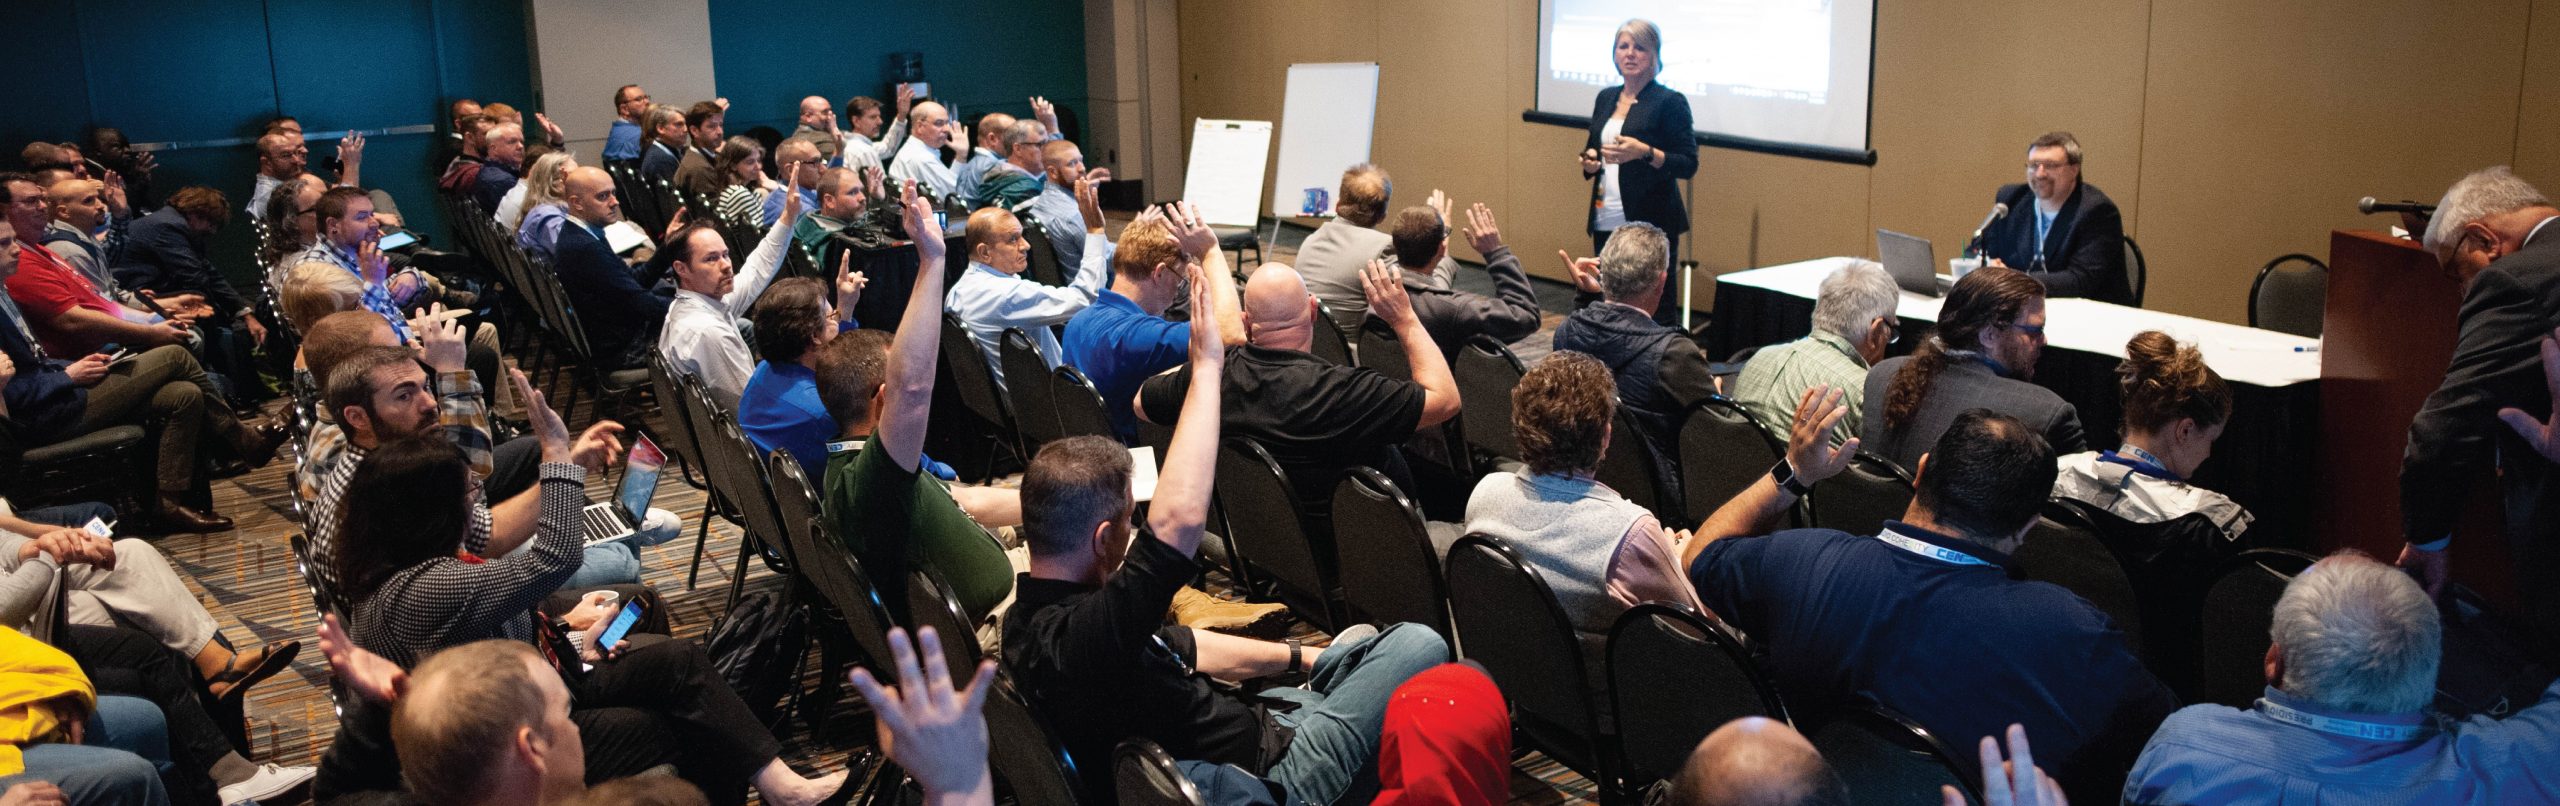 Image from the CEN Conference of a group of attendees sitting in chairs raising their hands and a woman speaking and giving a presentation